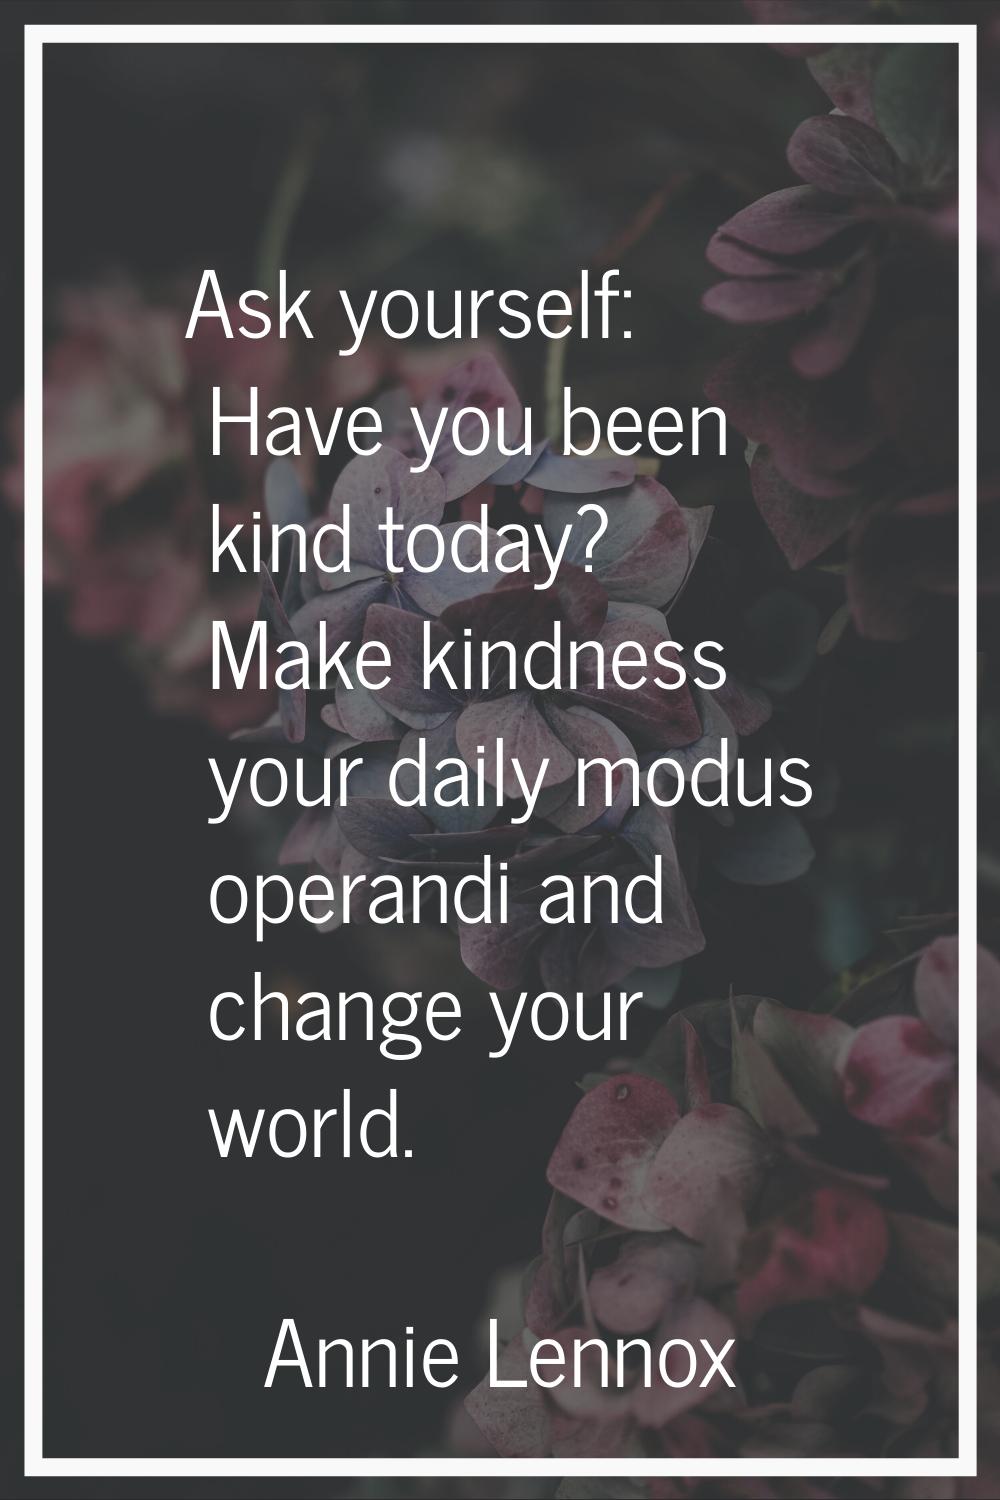 Ask yourself: Have you been kind today? Make kindness your daily modus operandi and change your wor